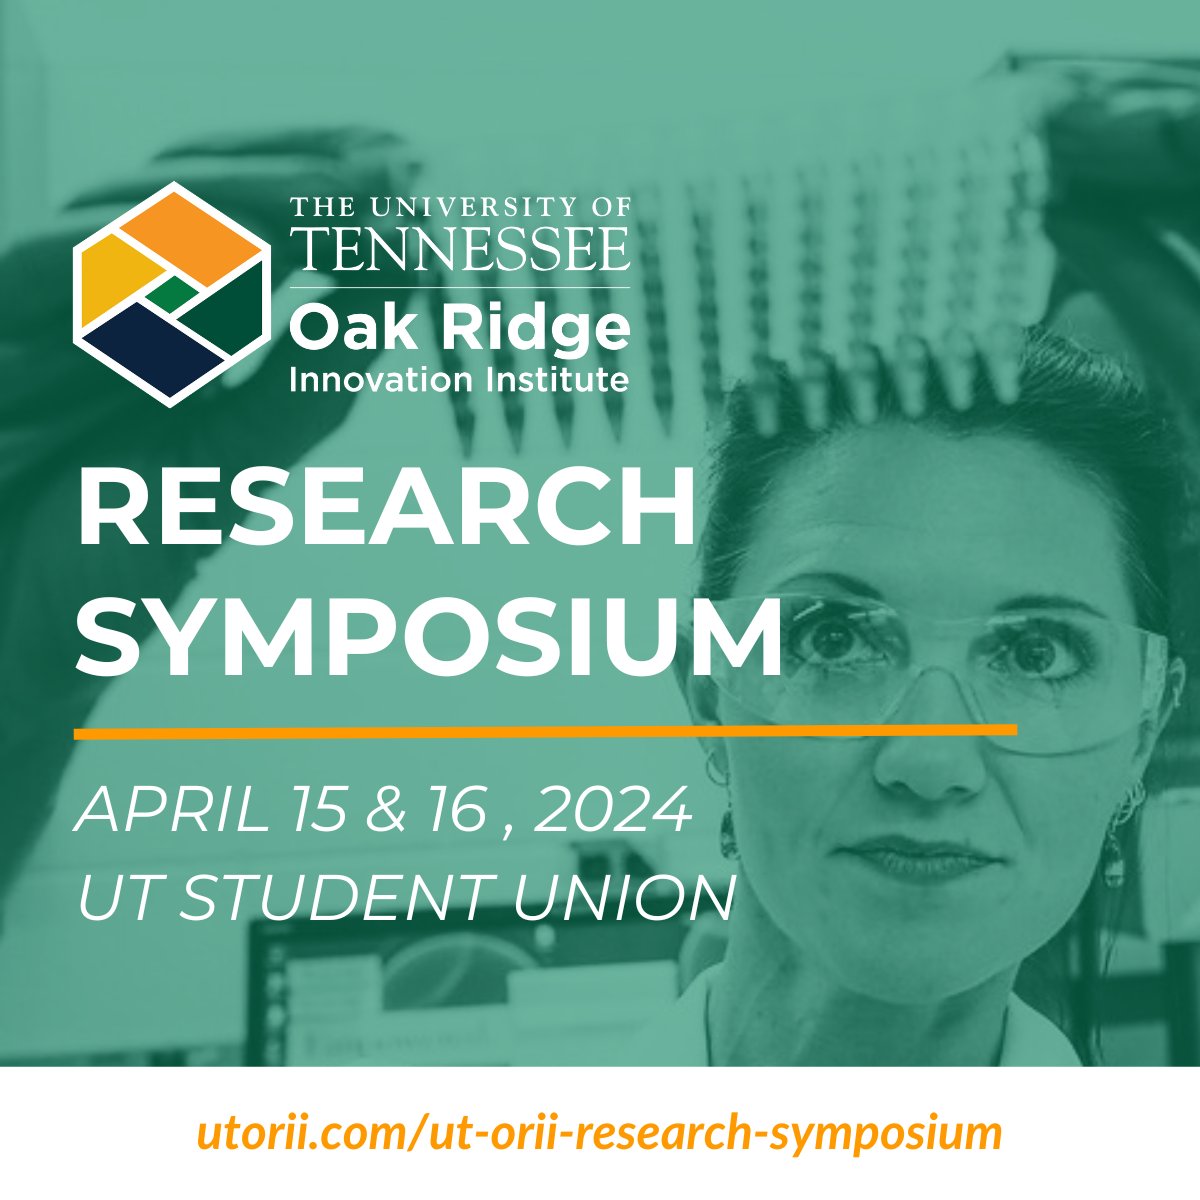 Meet the researchers who are helping shape groundbreaking science for Tennessee and our nation at UT-ORII’s research symposium April 15 and 16 at the University of Tennessee, Knoxville! Learn more and view the agenda at utorii.com/ut-orii-resear…